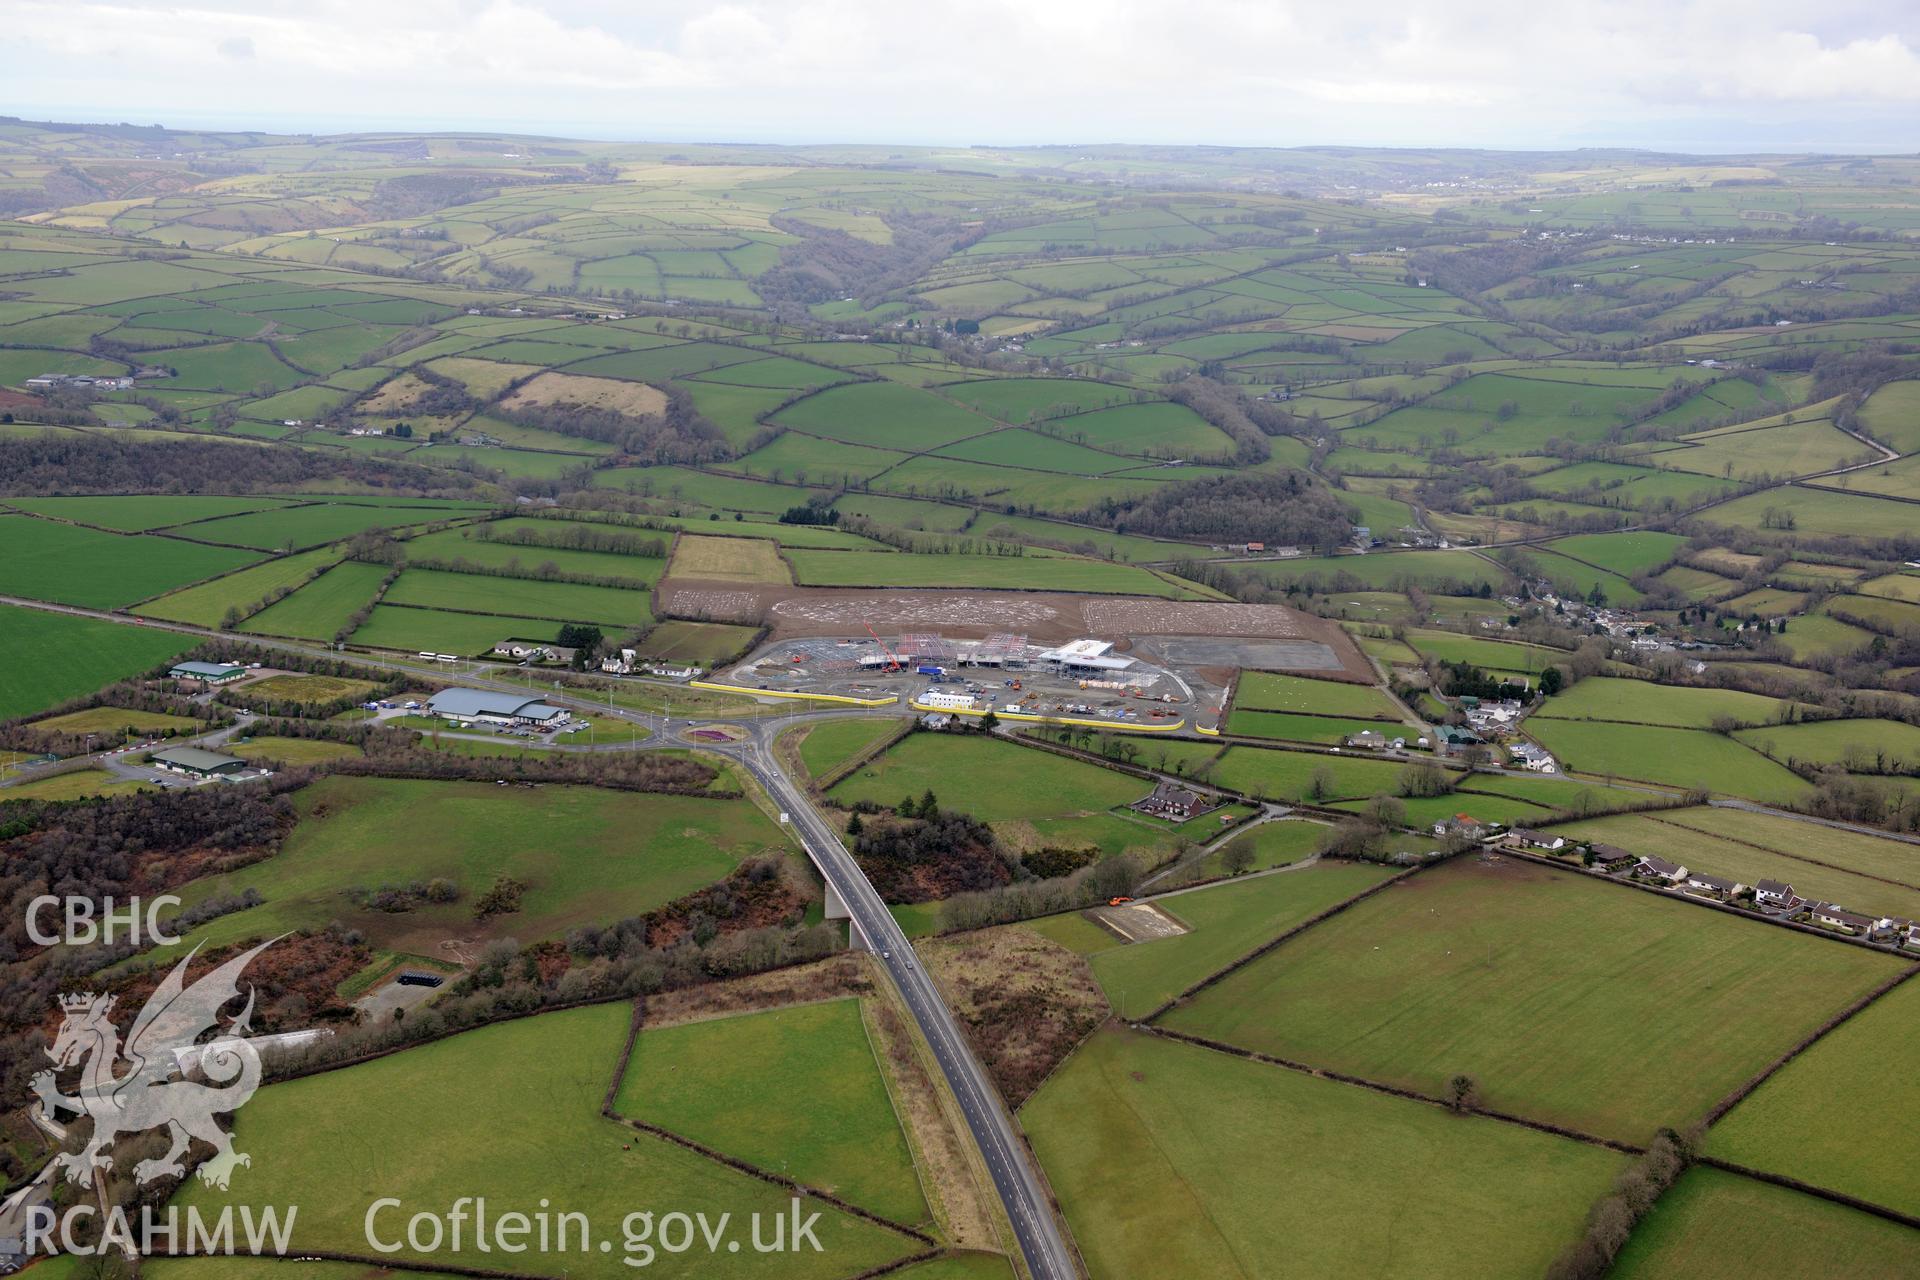 Ysgol Bro Teifi under construction and the A486 Llandysul bypass, on the northern outskirts of Llandysul. Oblique aerial photograph taken during the Royal Commission's programme of archaeological aerial reconnaissance by Toby Driver on 13th March 2015.